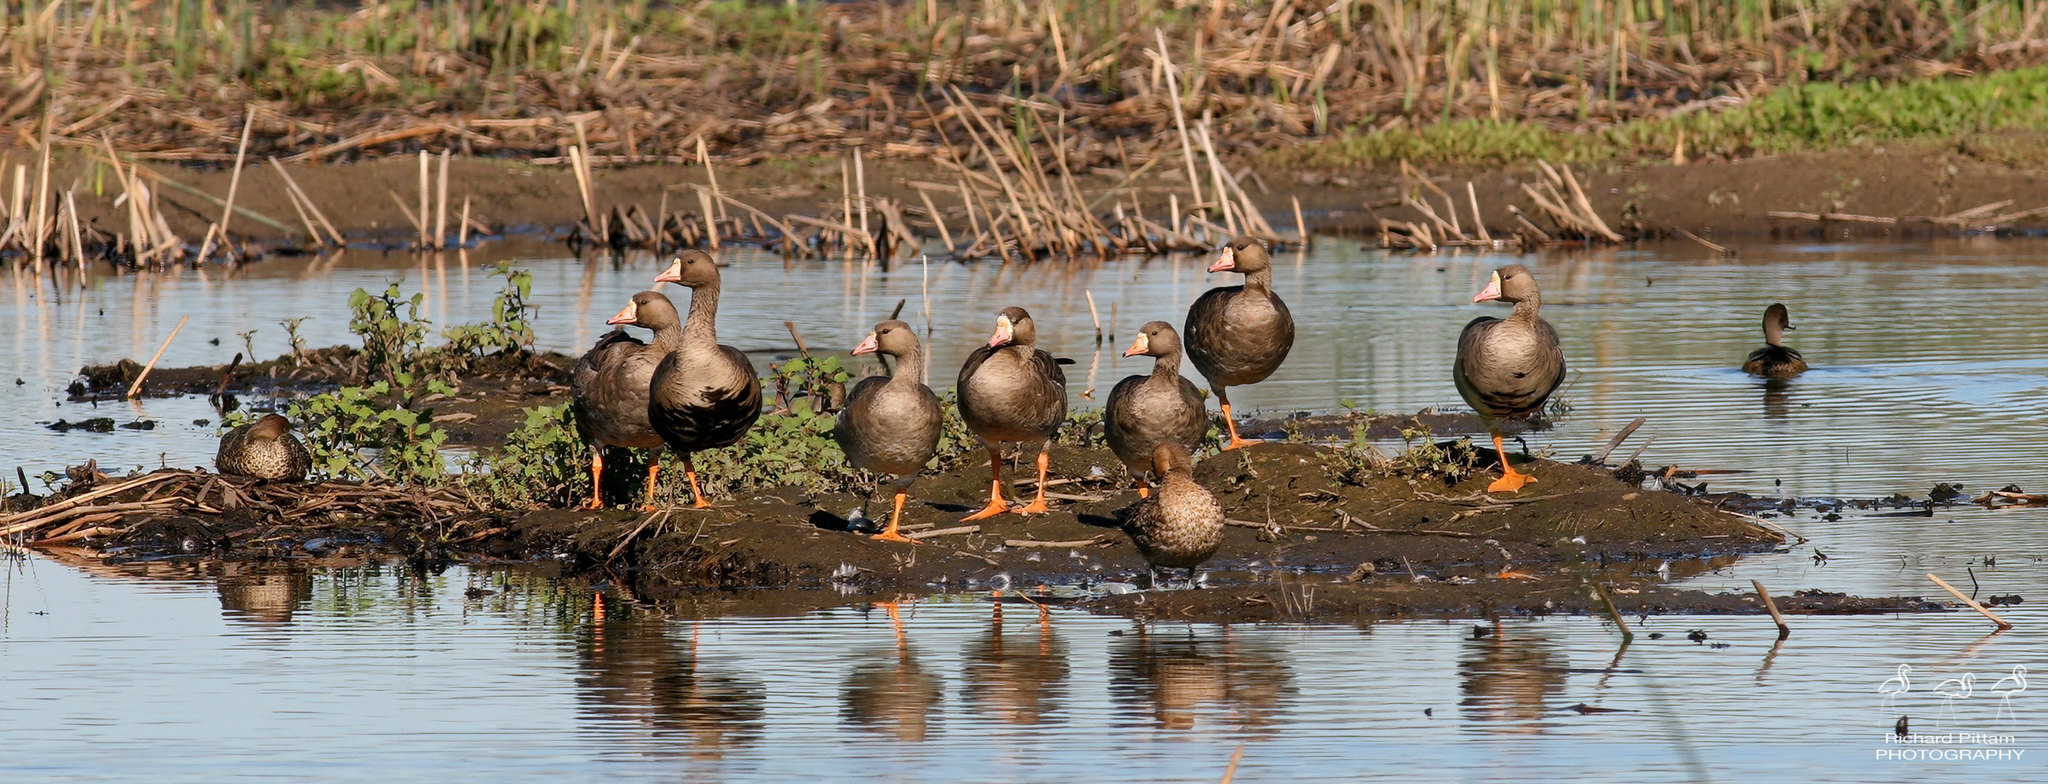 Greenland White-fronted Geese